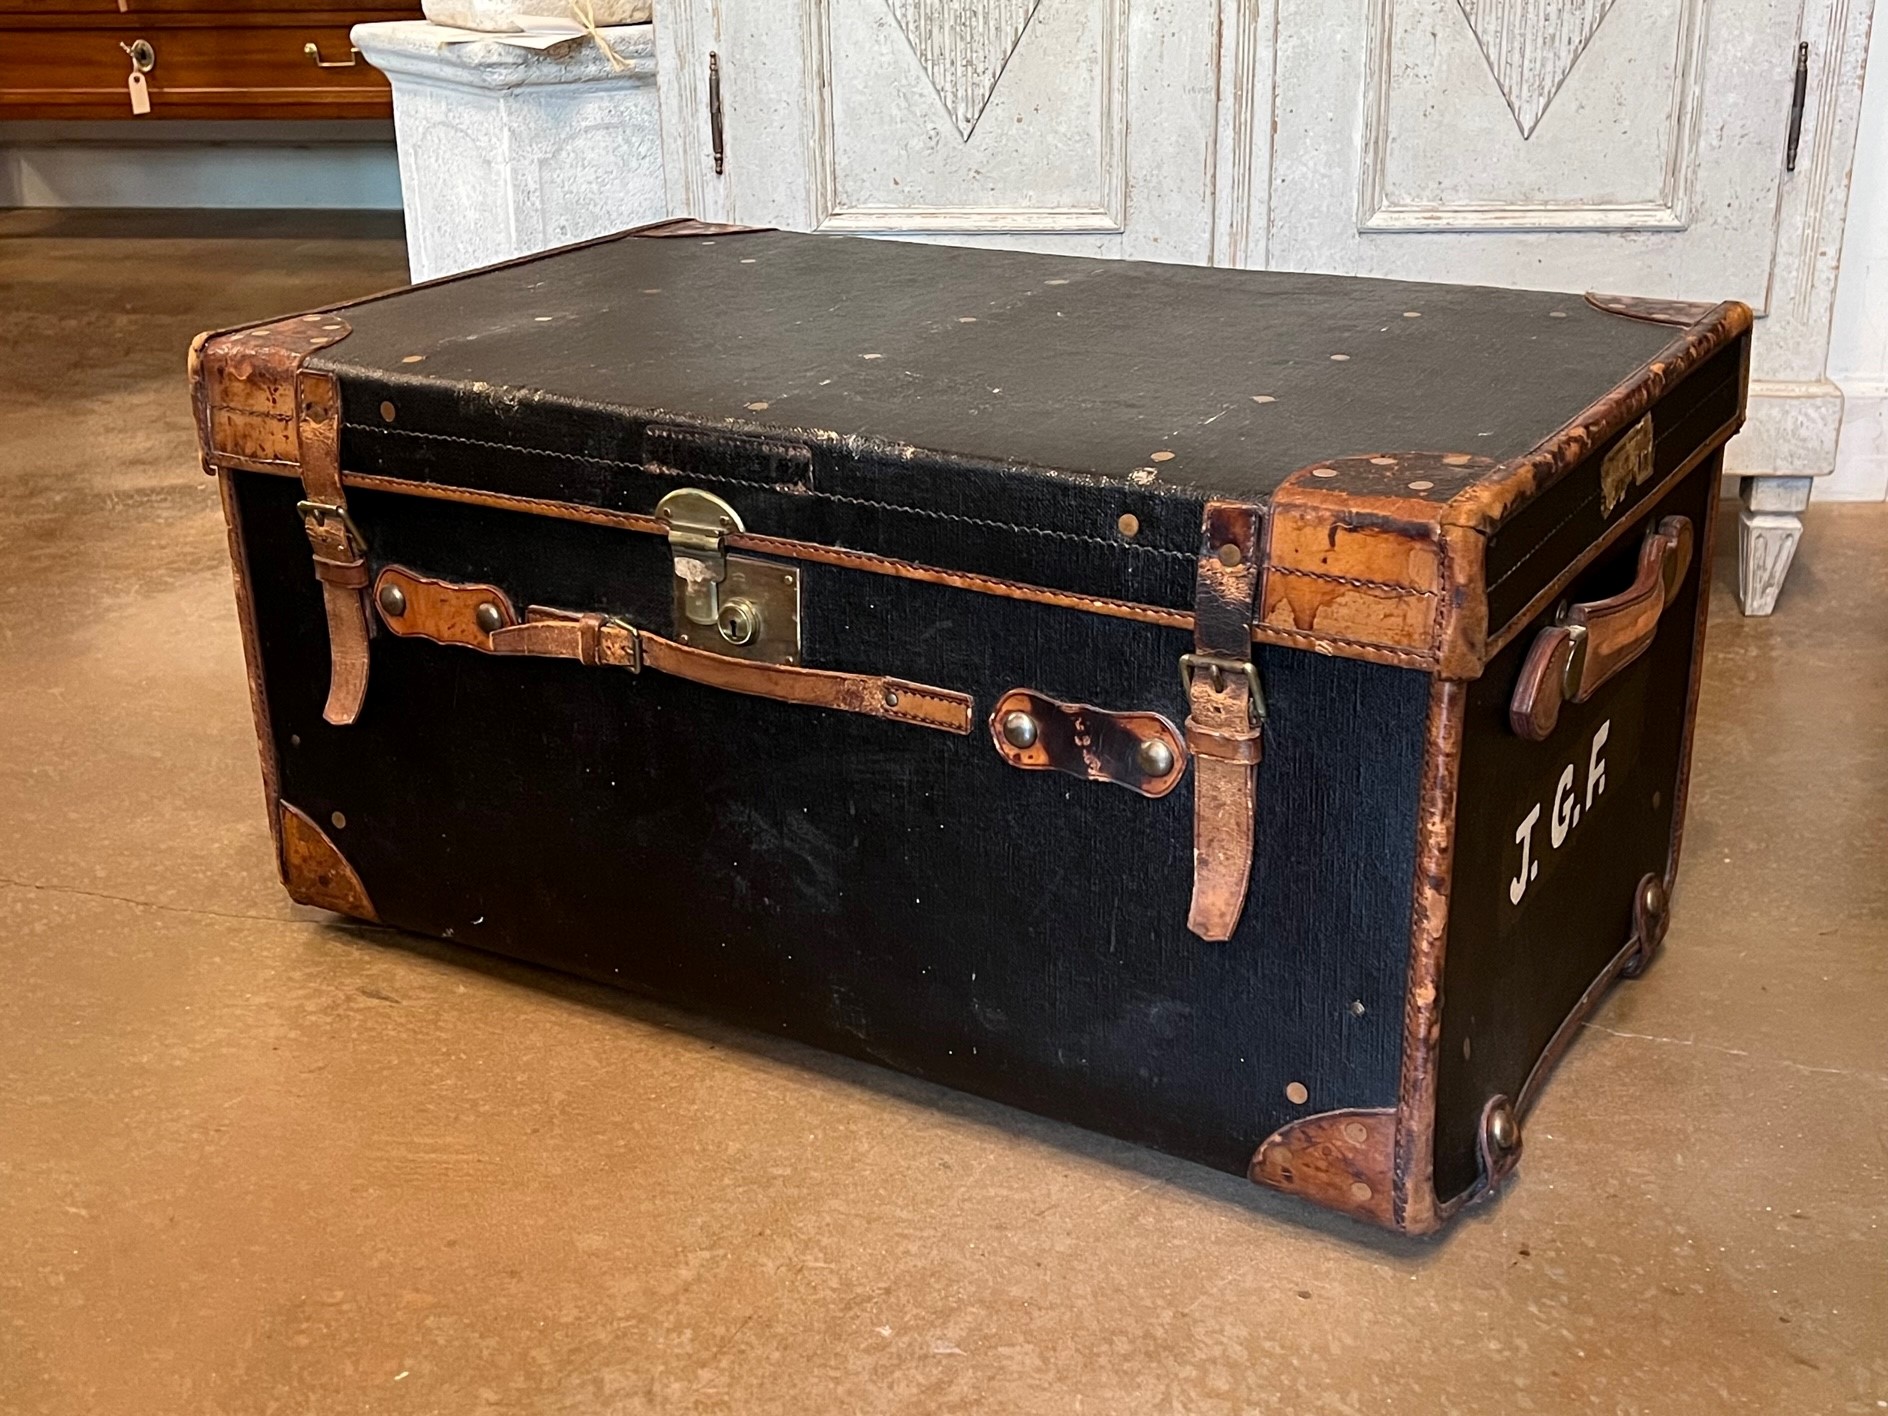 Antique English Traveling Trunk With Initials J.G.F.